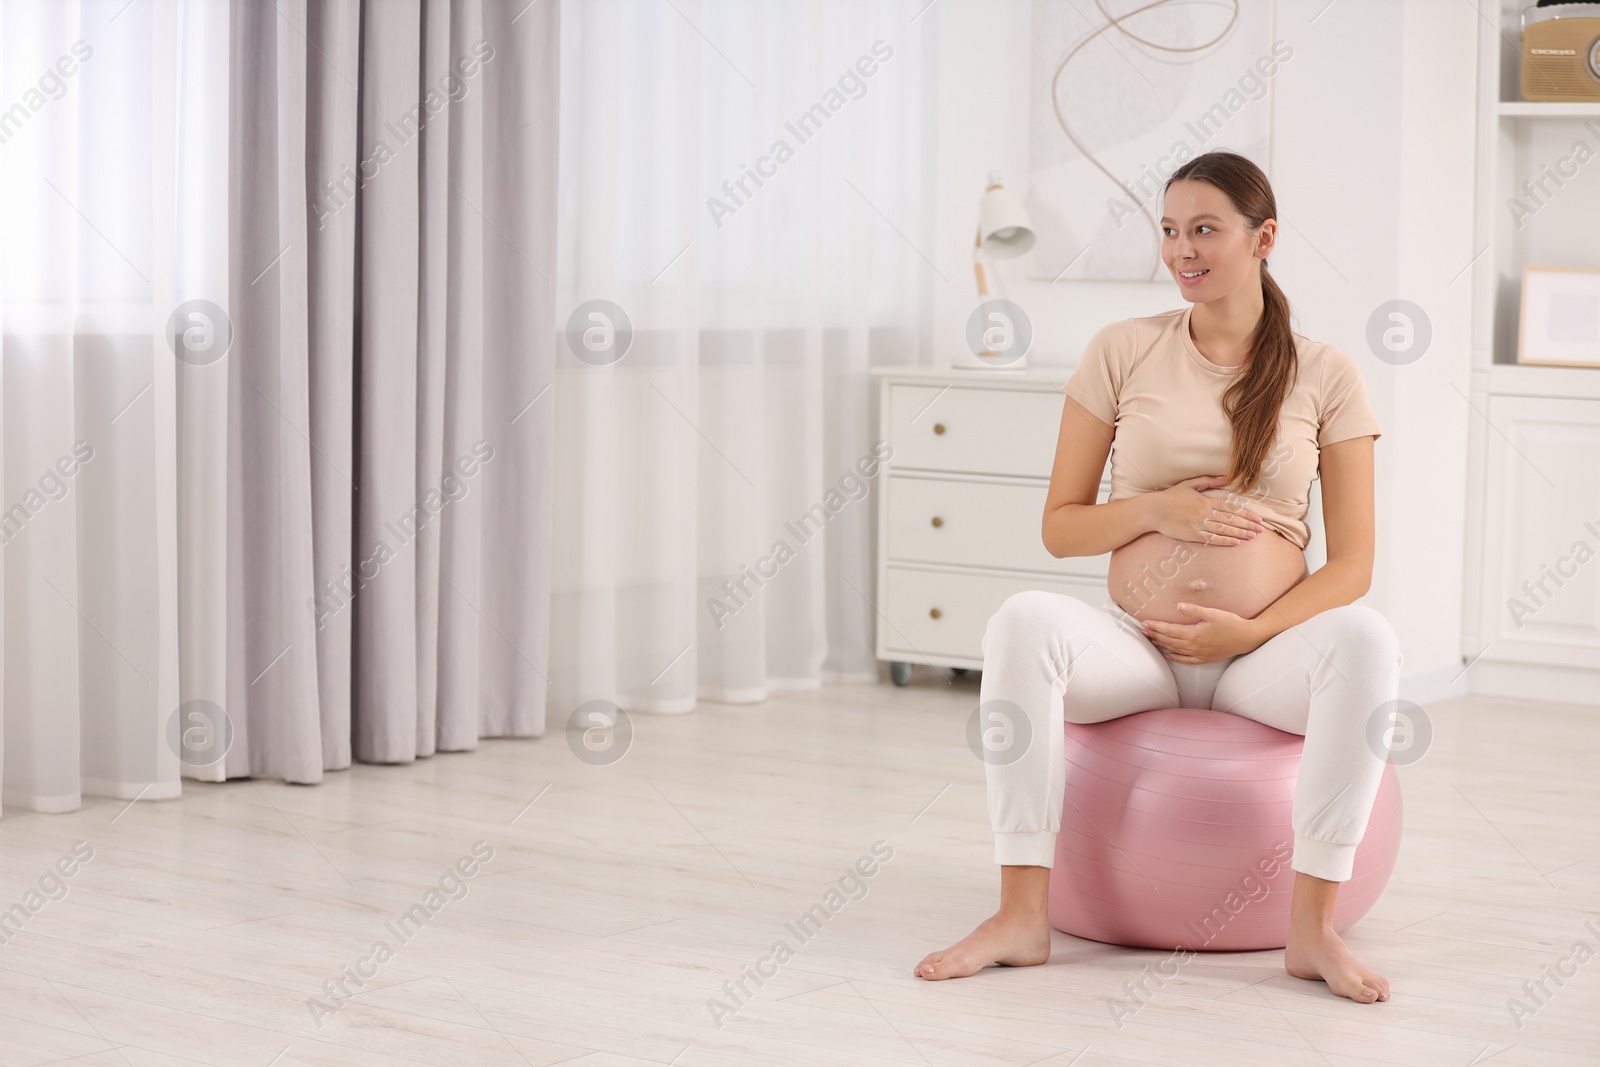 Photo of Pregnant woman sitting on fitness ball at home, space for text. Doing yoga